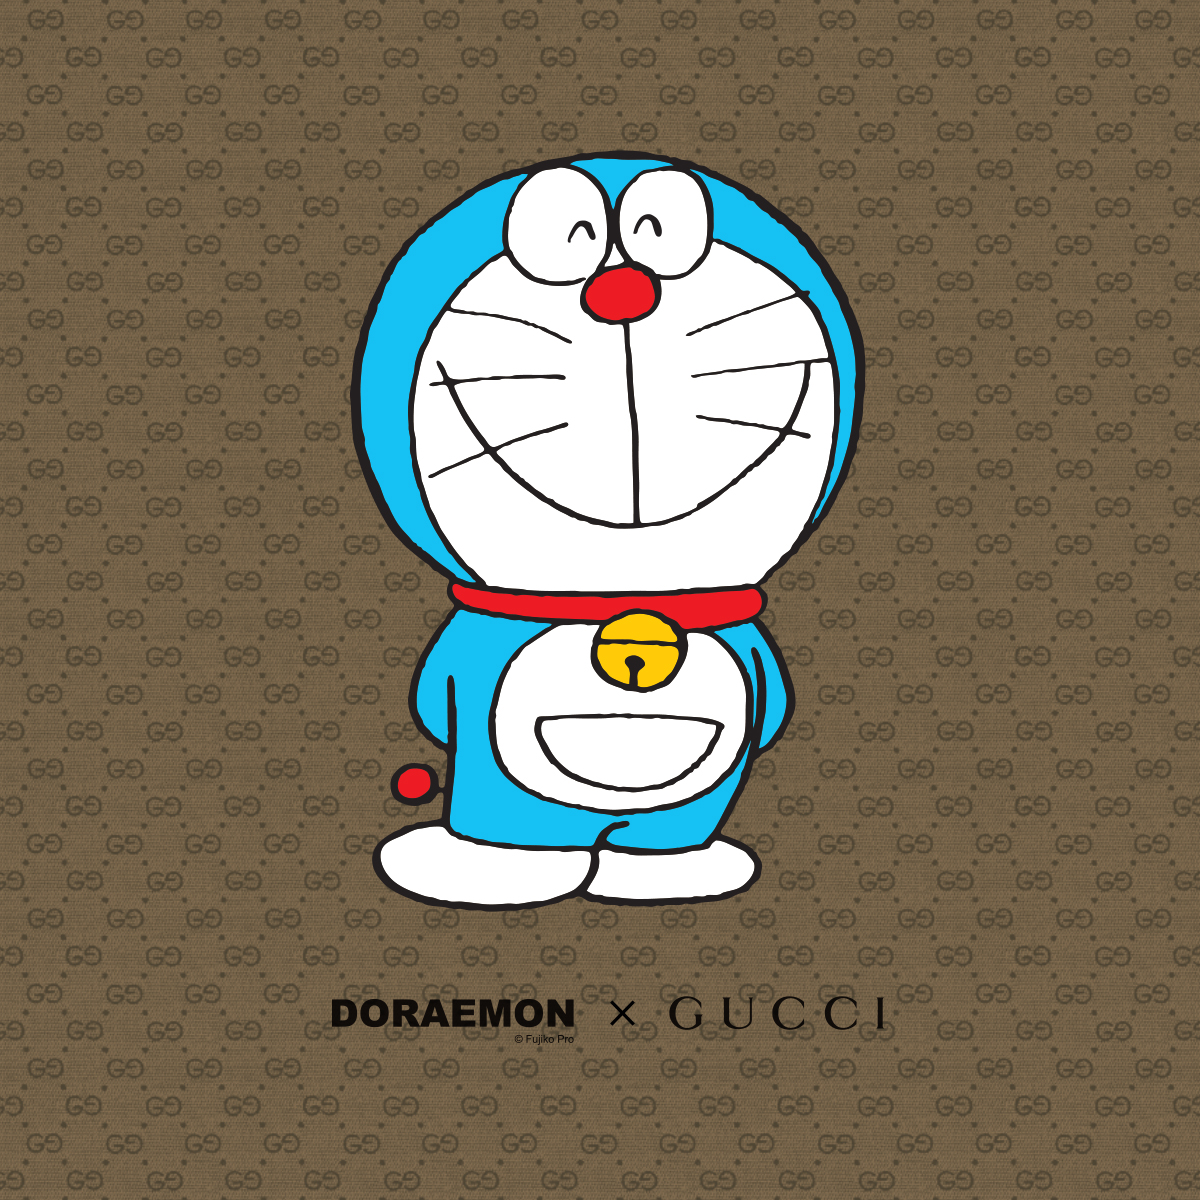 Doraemon Background Online Discount Shop For Electronics Apparel Toys Books Games Computers Shoes Jewelry Watches Baby Products Sports Outdoors Office Products Bed Bath Furniture Tools Hardware Automotive Parts Accessories